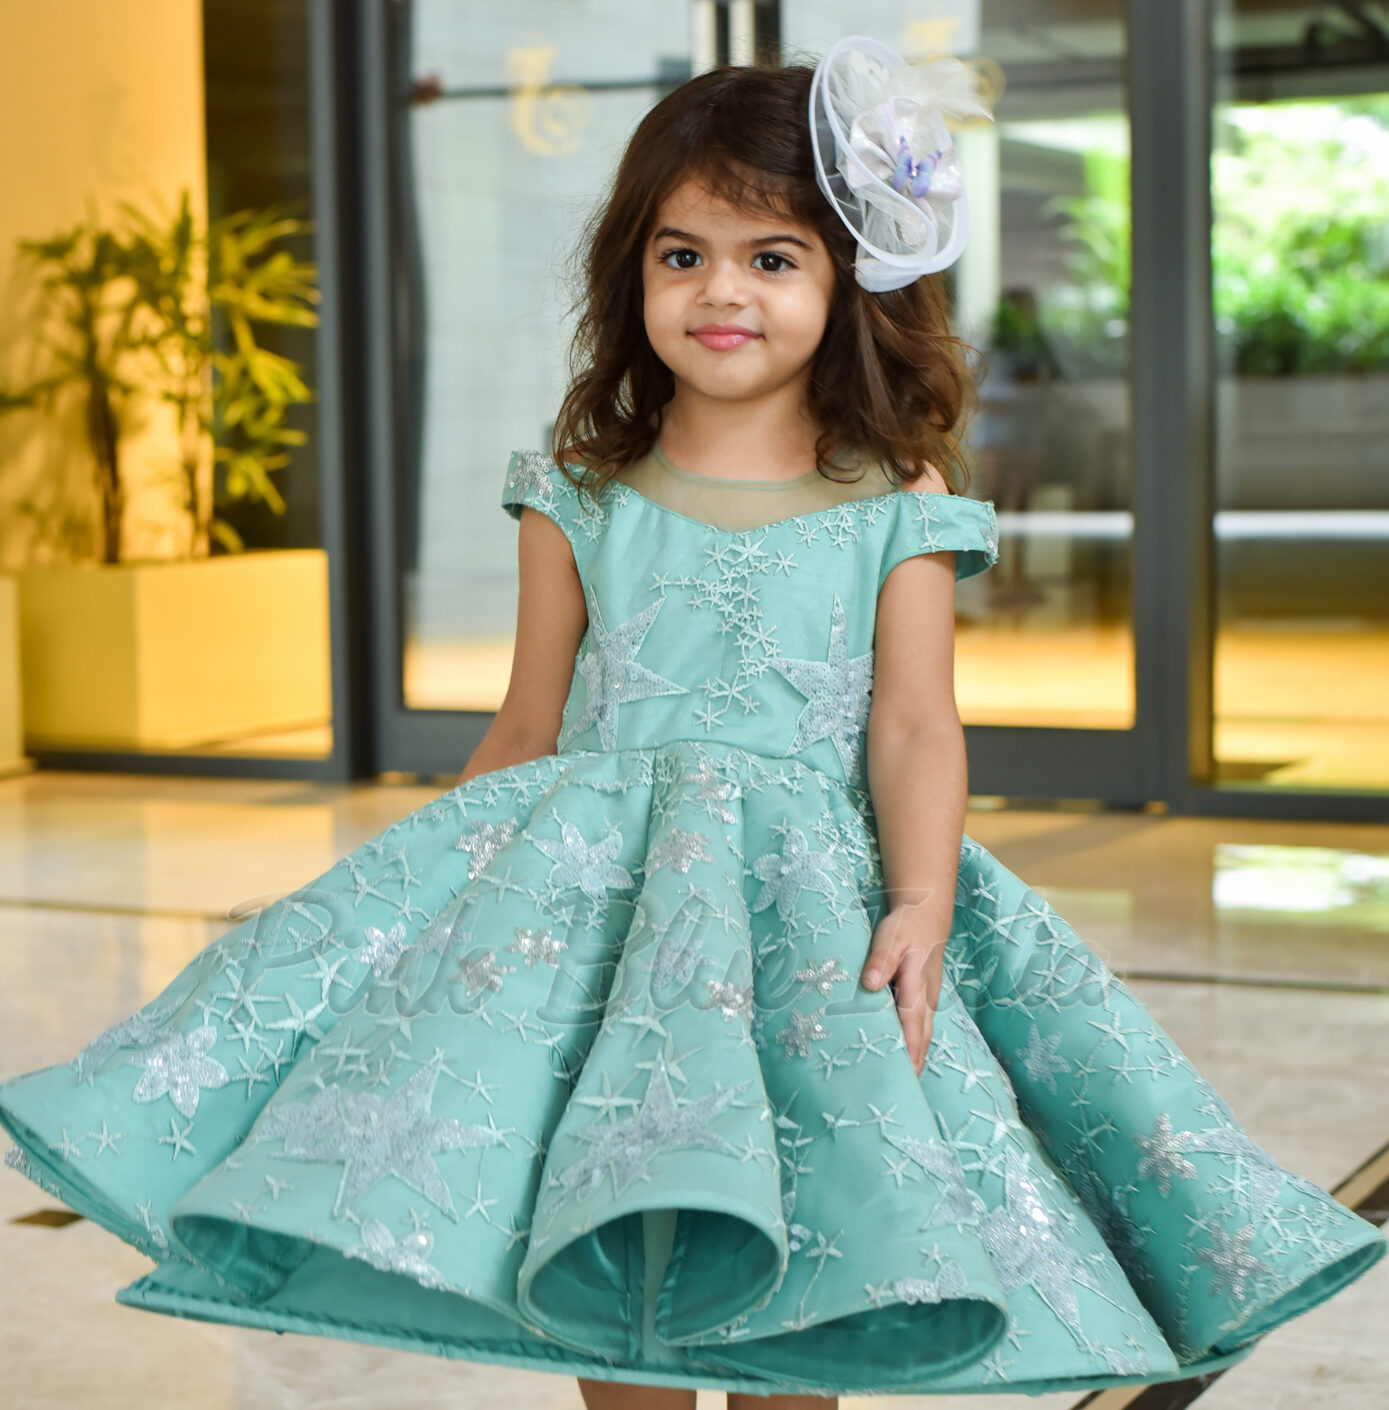 Lace Flower Girl Dress: Sheer Neck, Ball Gown, Wedding Or Communion Dress  Affordable, Elegant, And Stylish From Chic_cheap, $56.69 | DHgate.Com